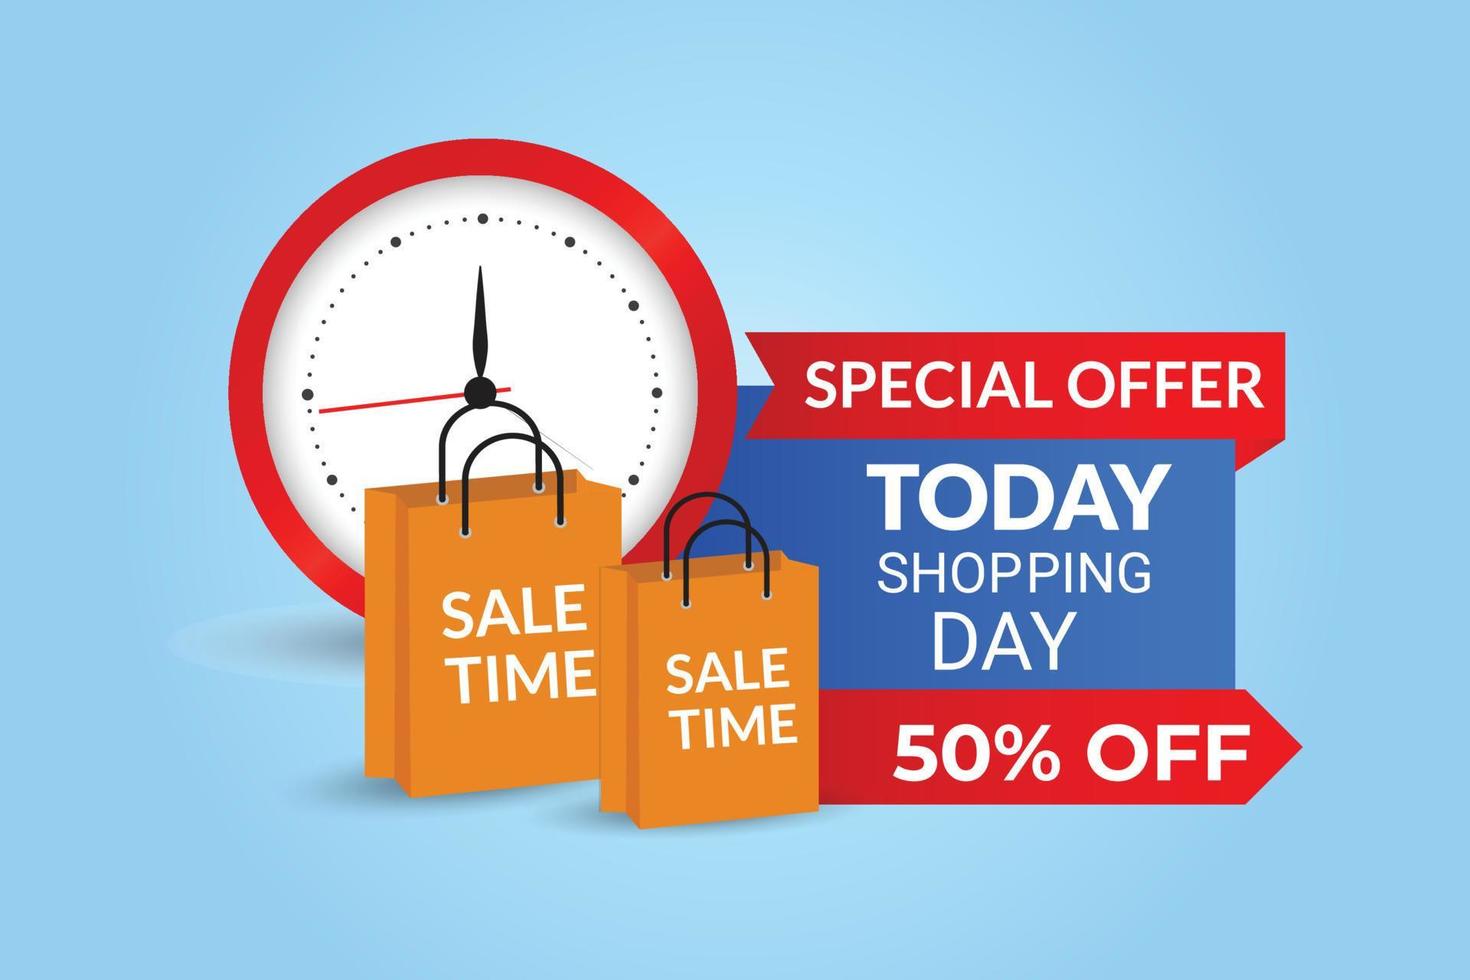 Today shopping day with special offer banner design. vector